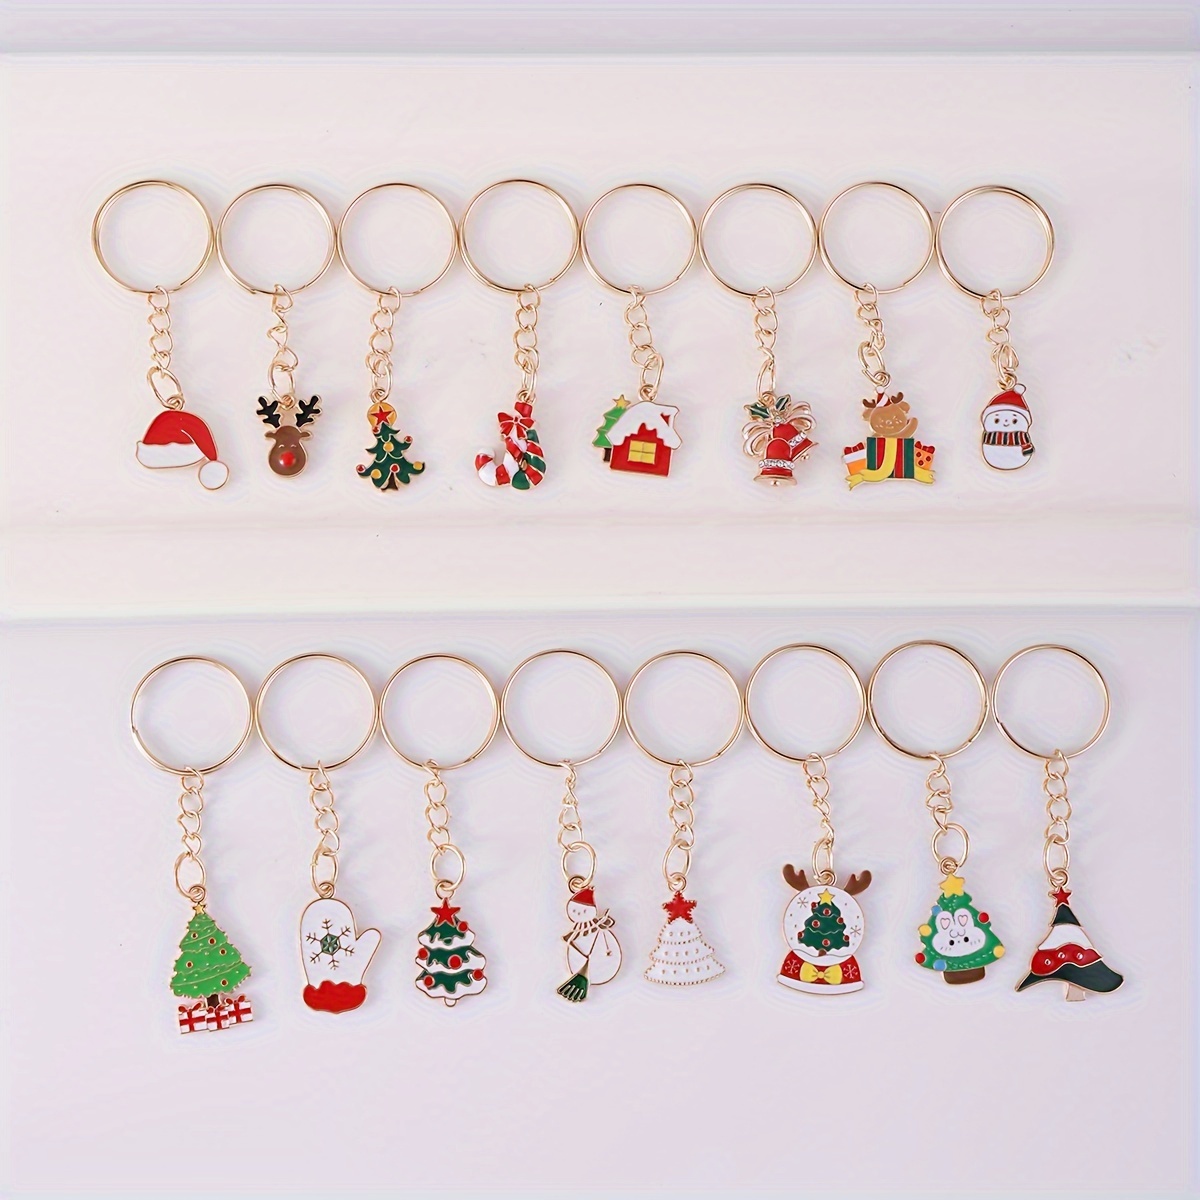 20pcs Cartoon Keychain Party Favors, Mini Cute Keyring For Classroom  Prizes, Birthday Christmas Party Favors Gift, Goodie Bag Stuffers Supplies